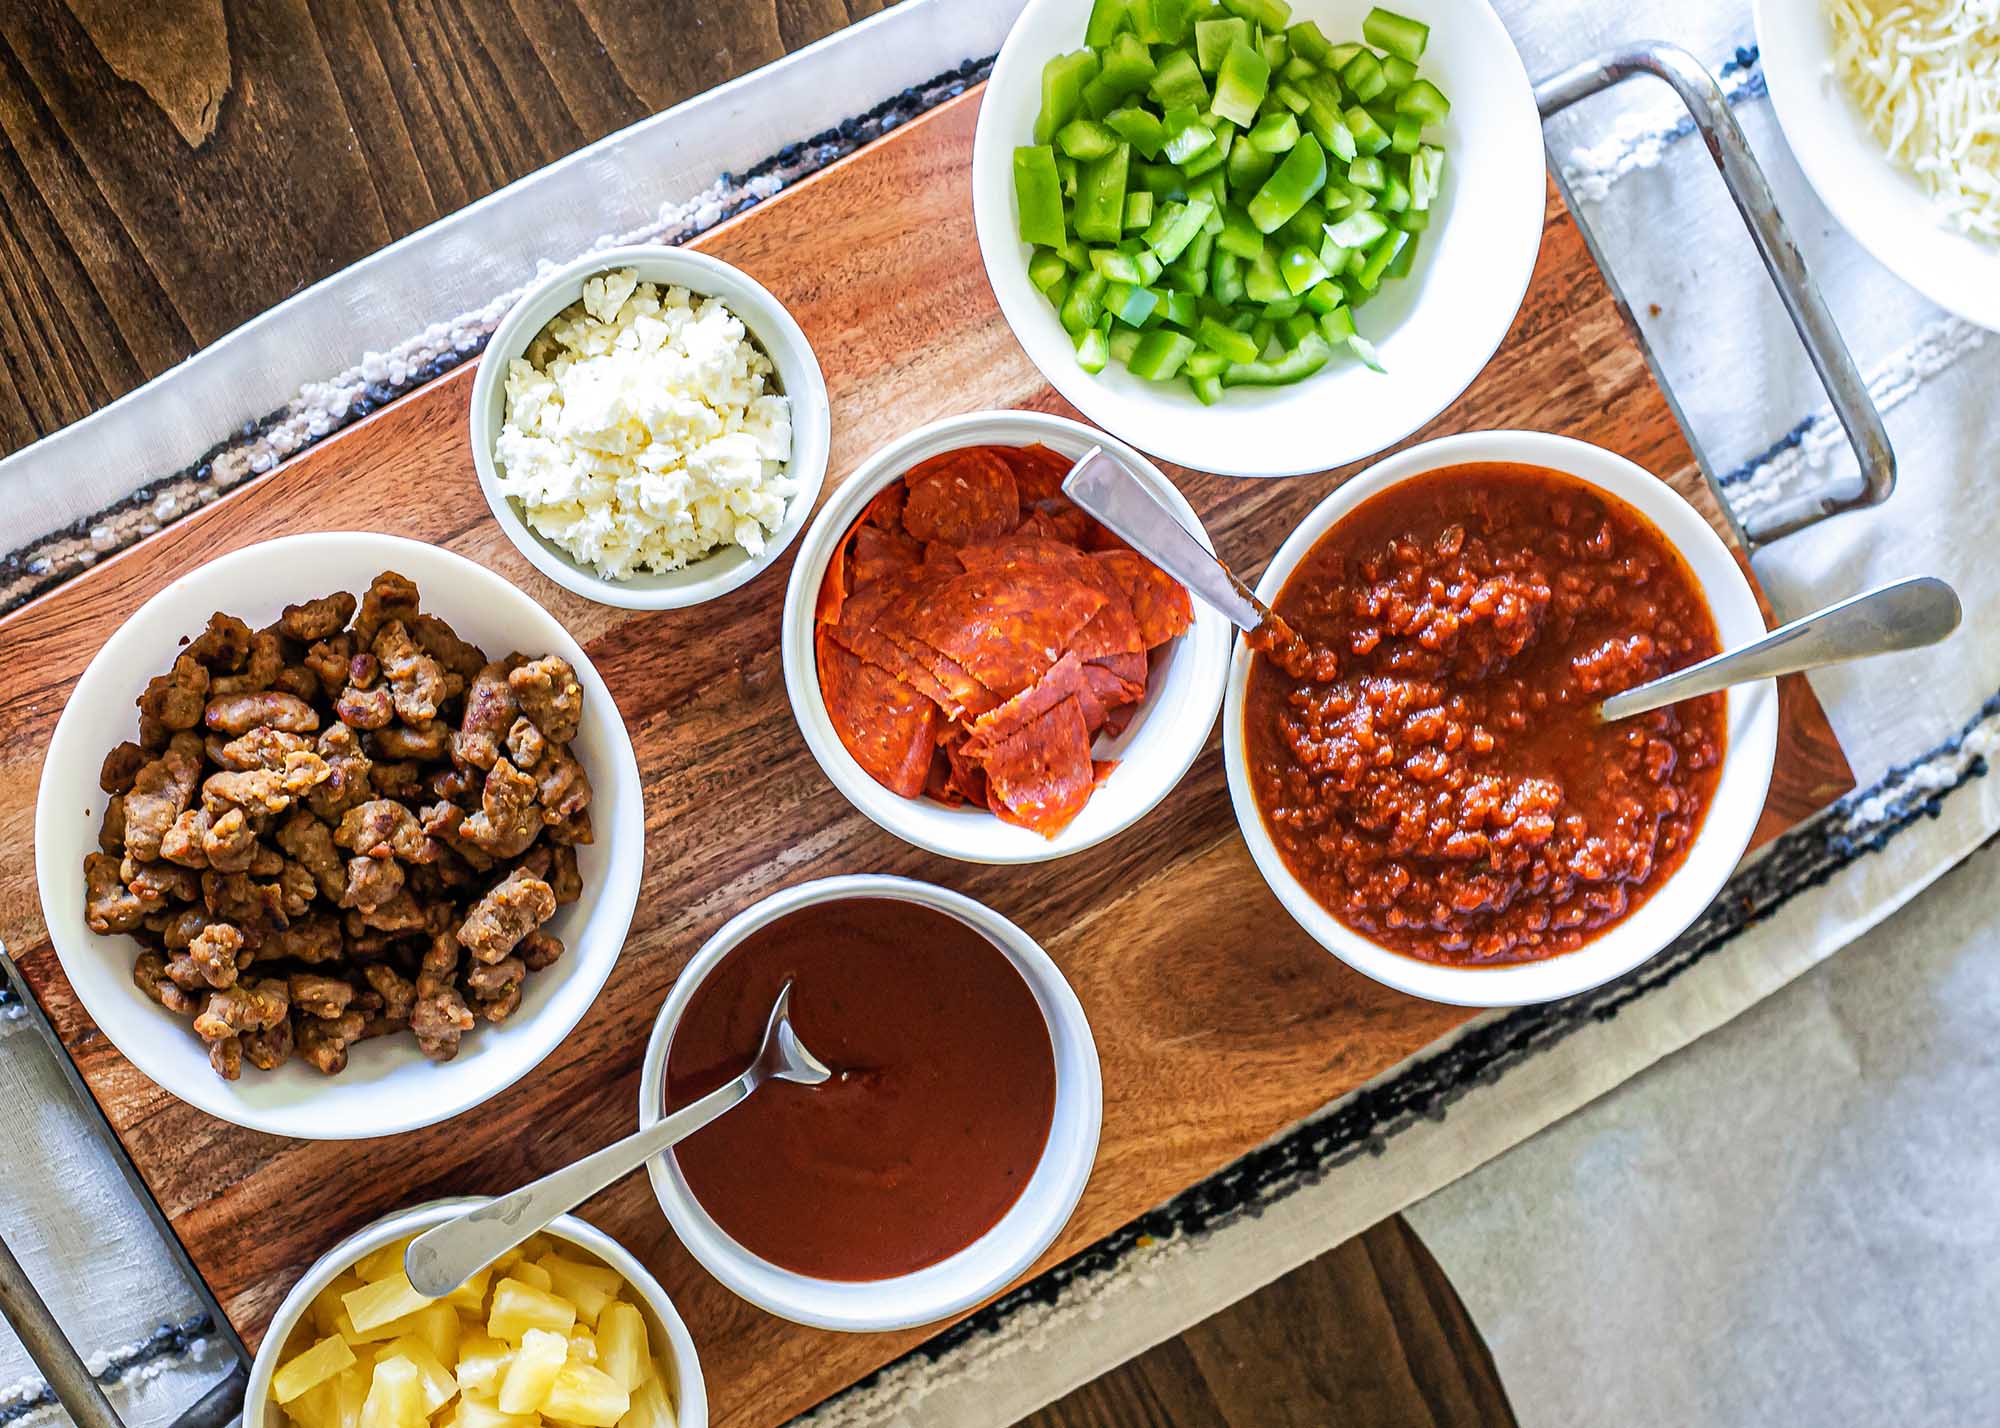 Overhead view of a wooden tray on a table with bowls of pizza toppings.